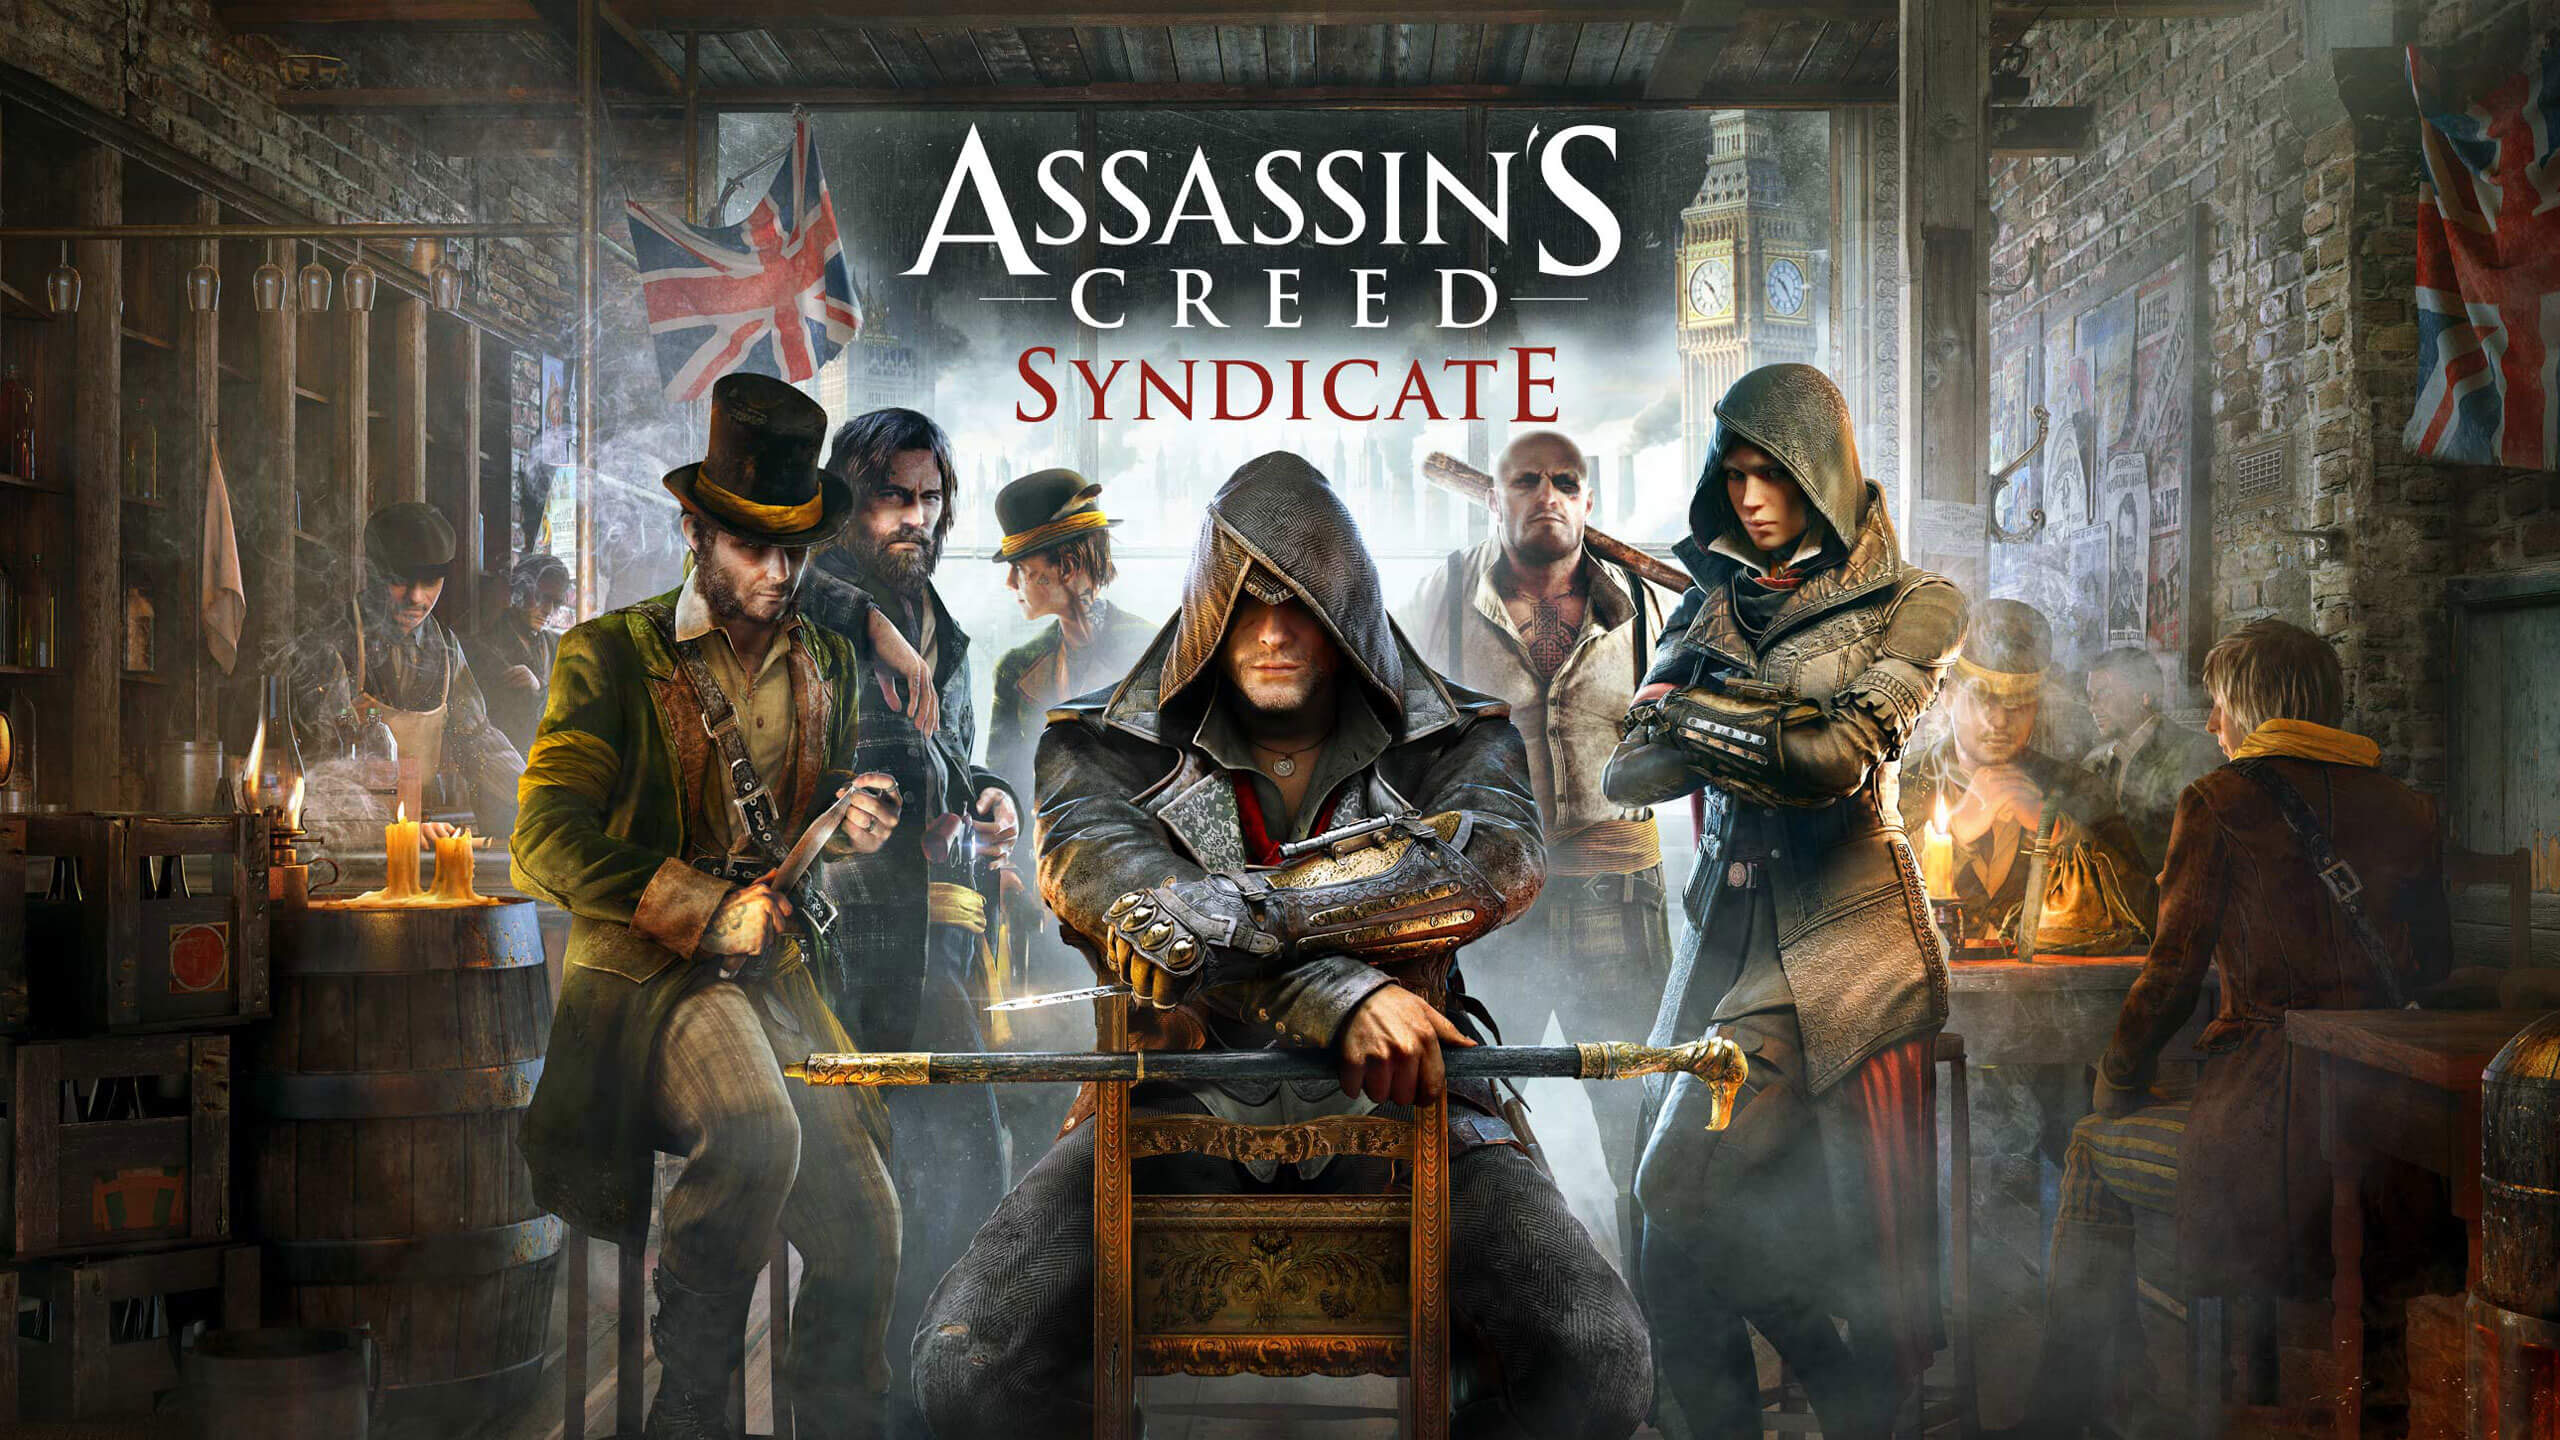 Diesel productv2 assassins creed syndicate home ACS STD 2560x1440 635b7b6c86f18730071426375e7c4fe0bd831ddd Download Assassin's Creed: Syndicate for PC